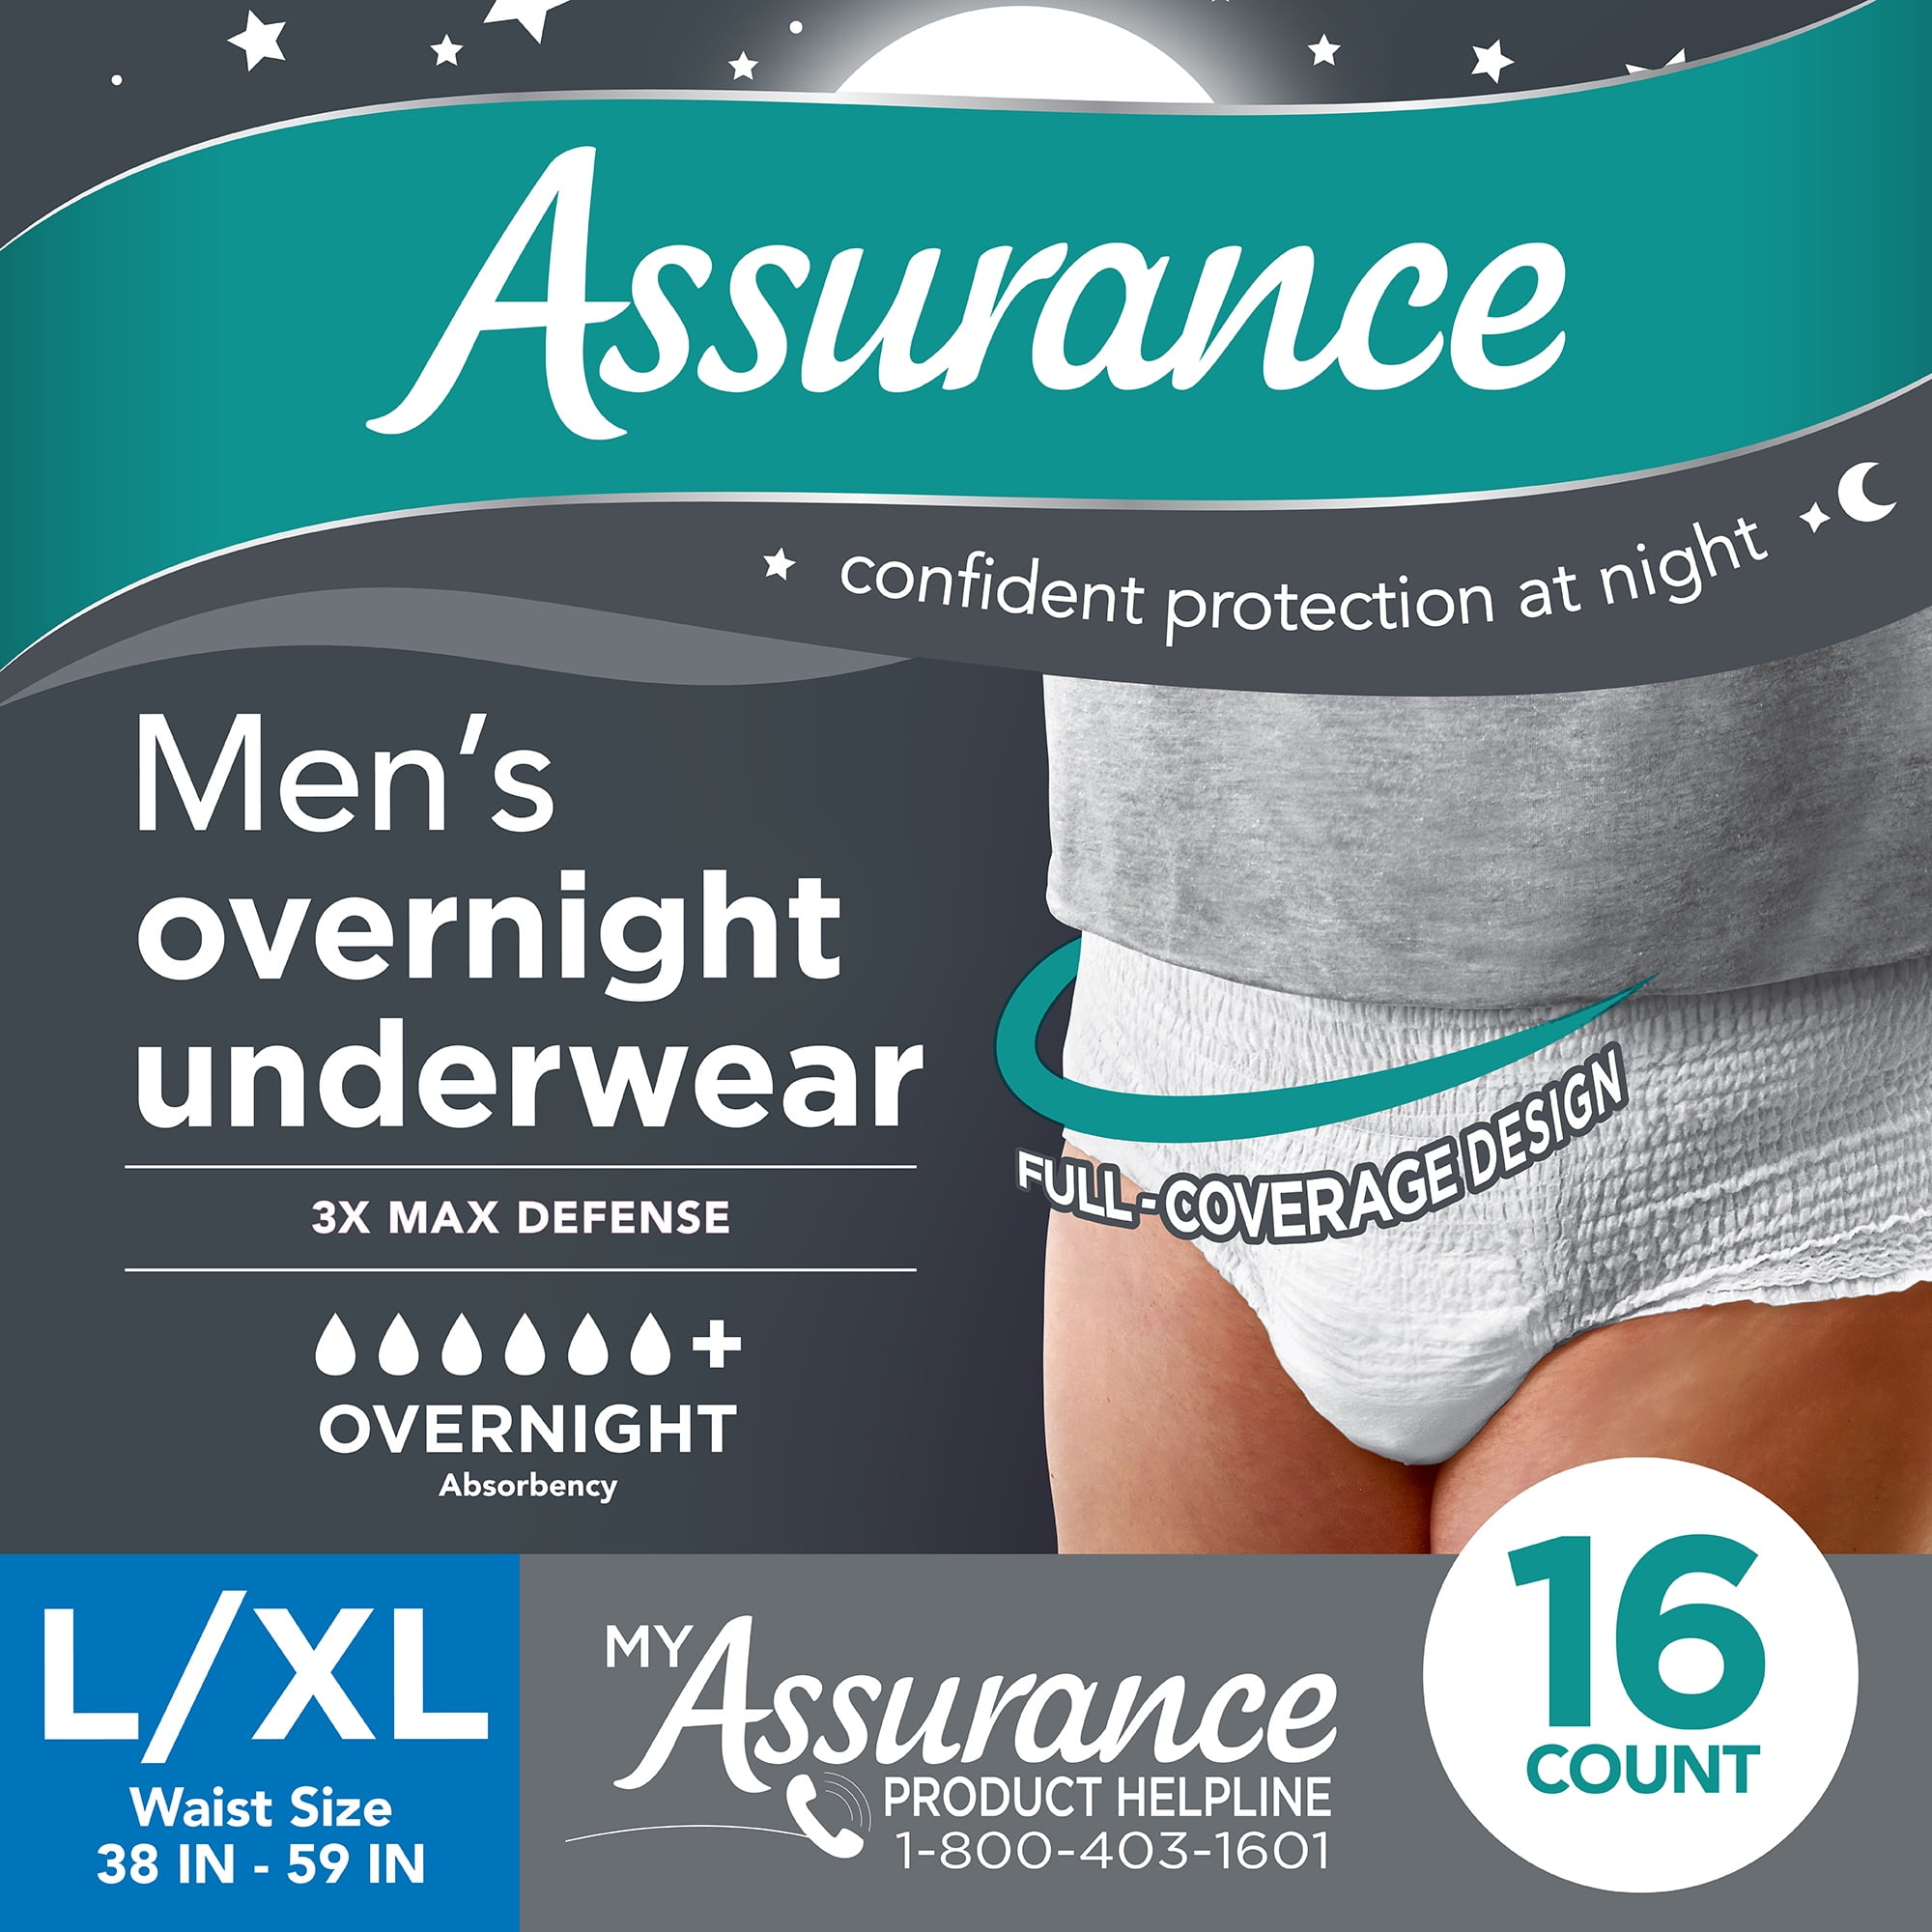 Get Comfort and Safety With Attends Overnight Briefs